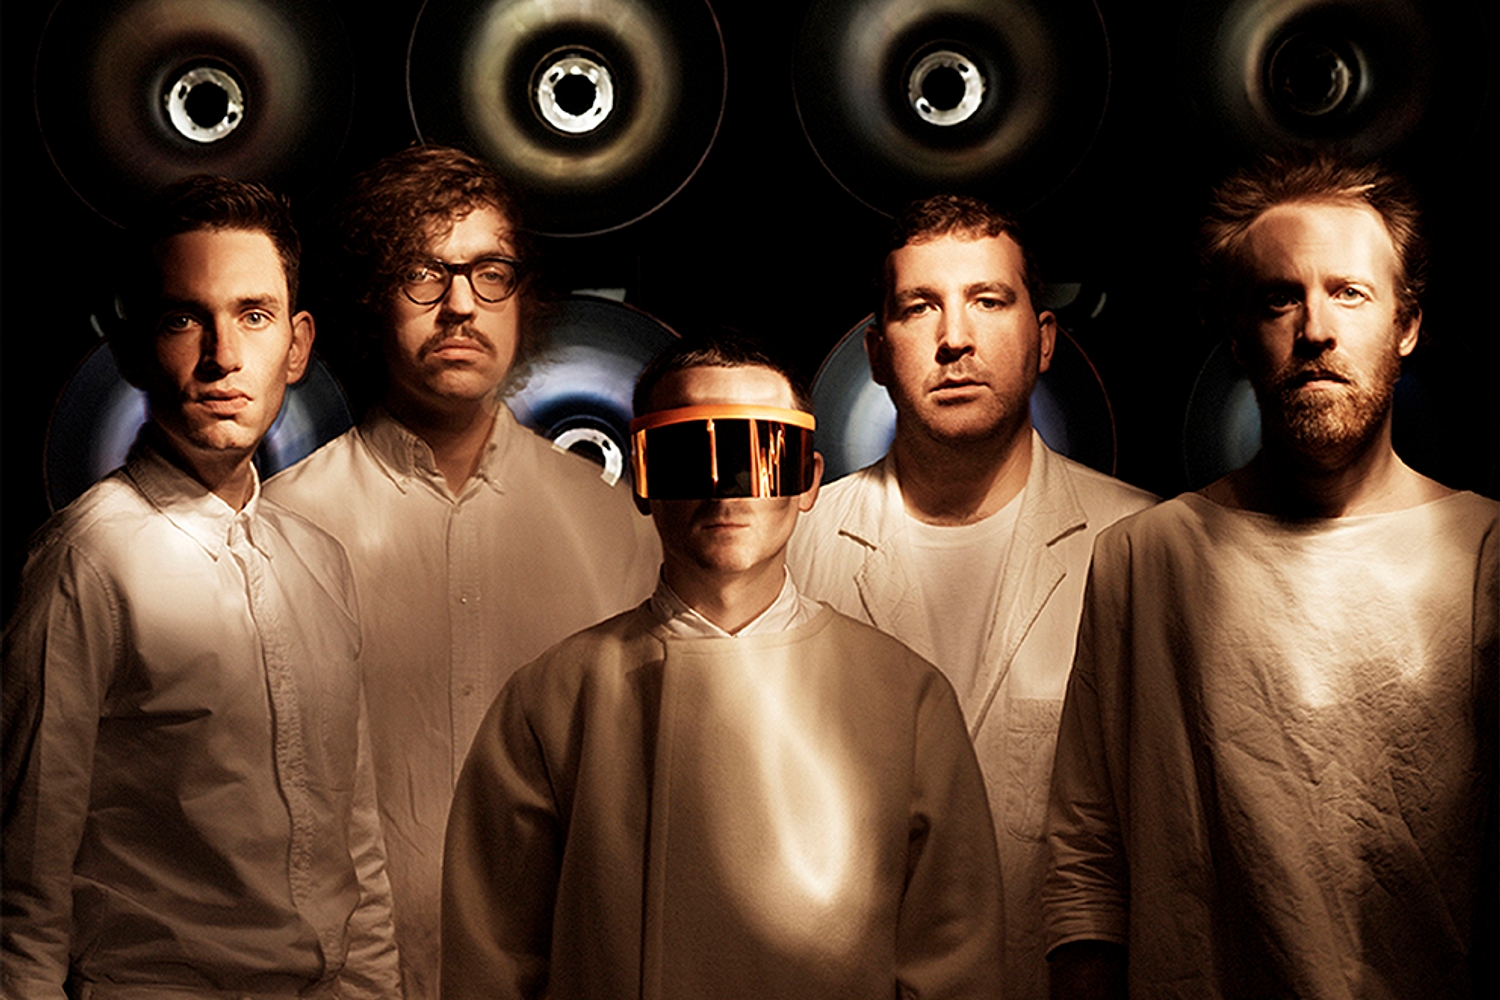 Hot Chip share video for Bruce Springsteen cover 'Dancing in the Dark,' and LCD Soundsystem cover 'All My Friends'